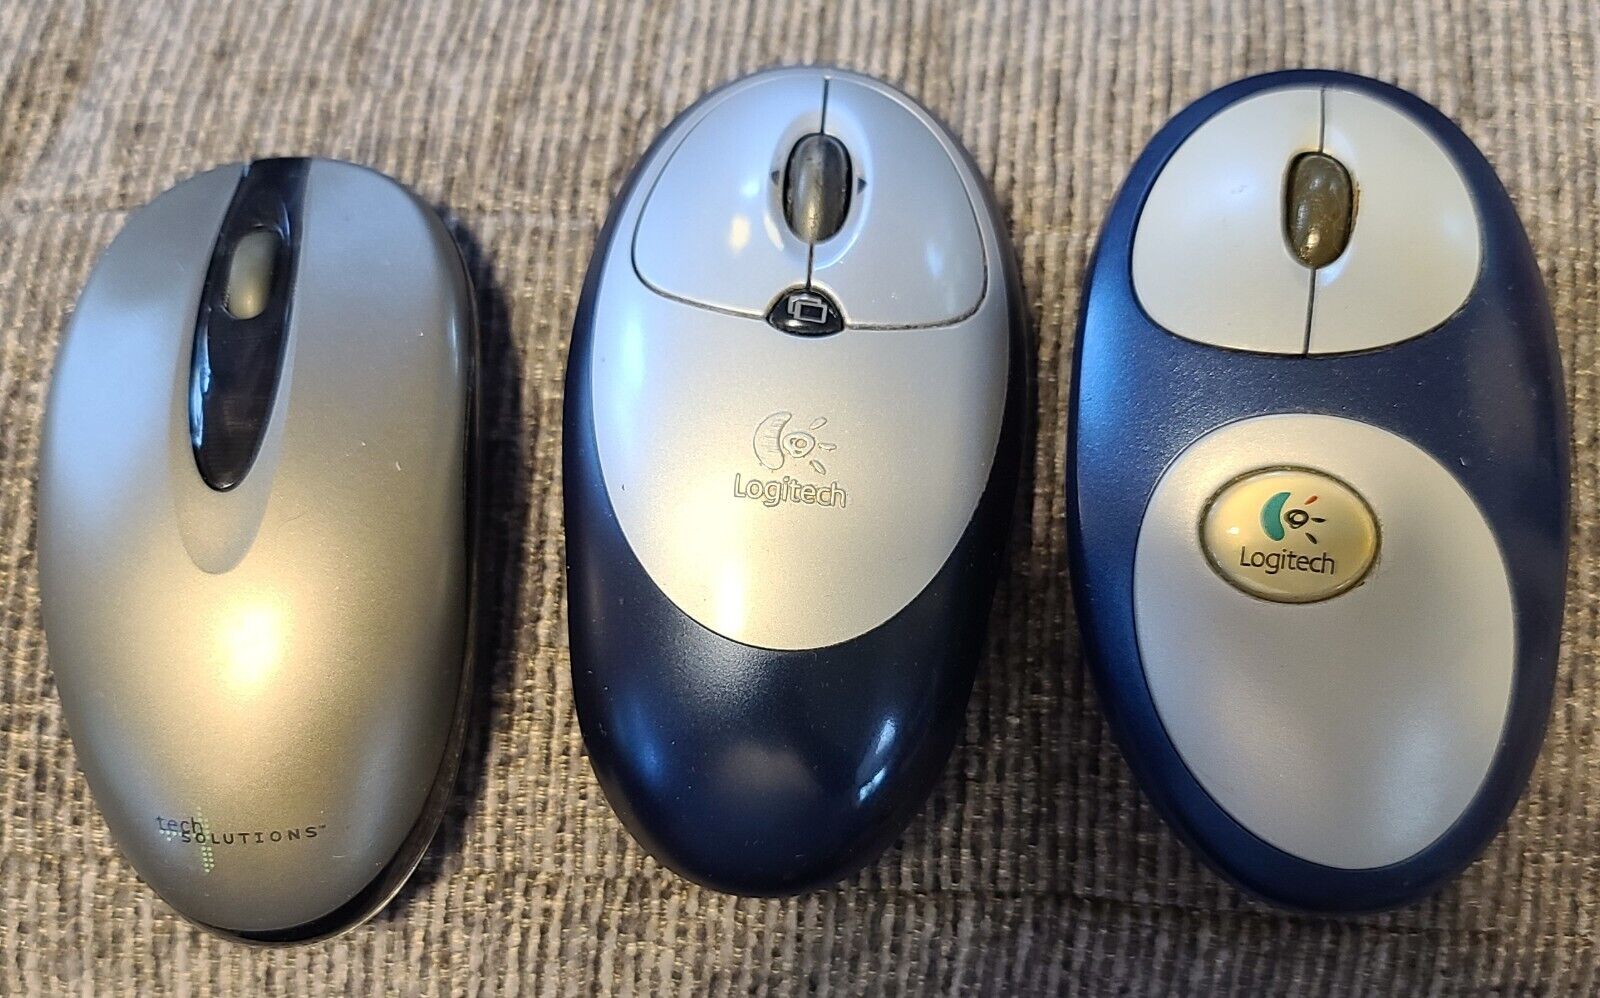 Vintage Lot Of 3 Wireless Mice No Receivers Logitech Technology Solutions 